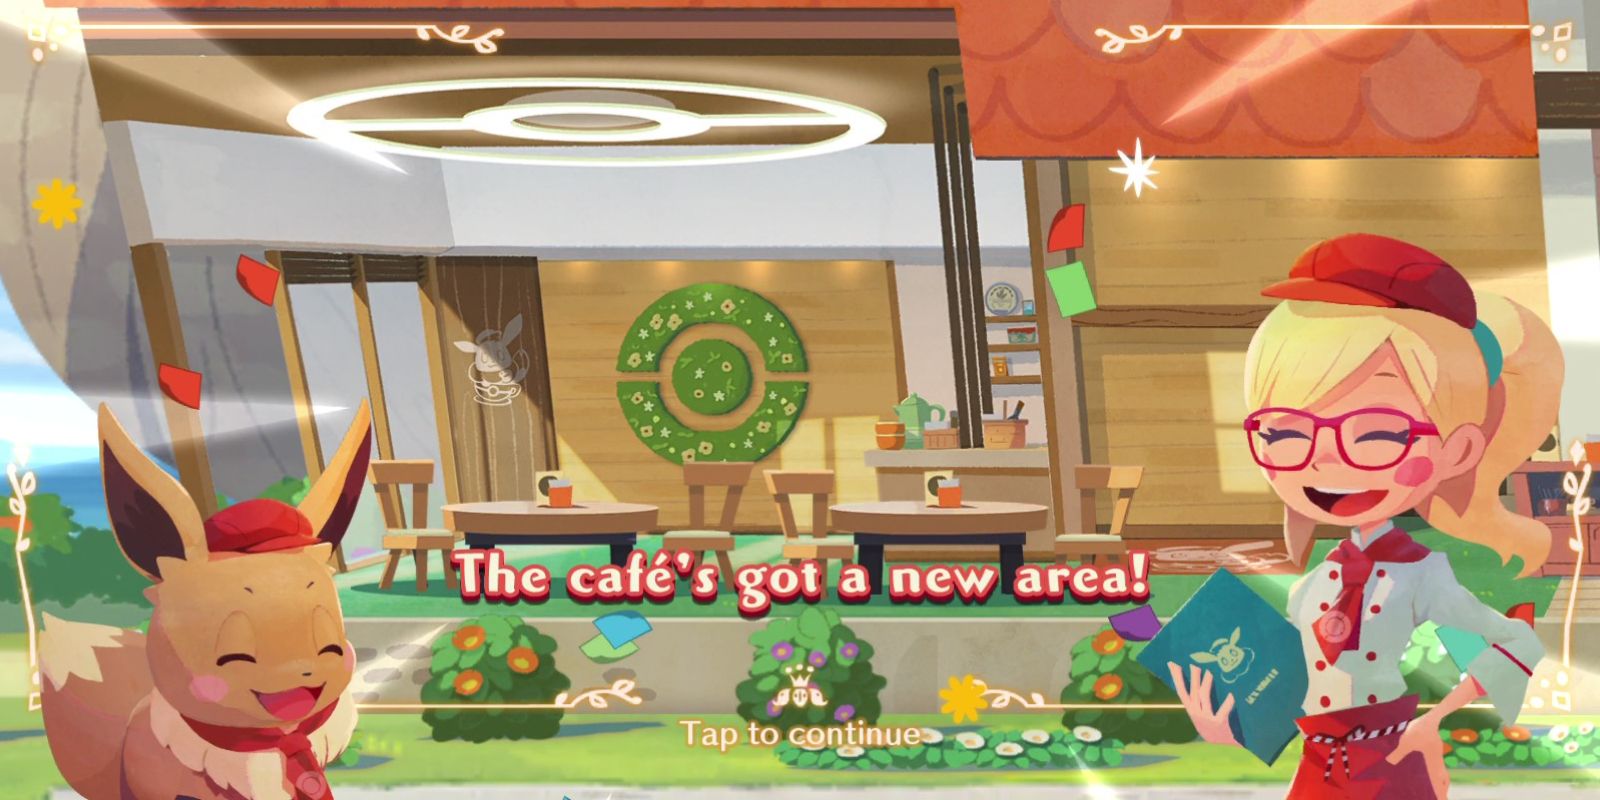 A Pokémon monster laughs with a female cafe employee in the Nintendo Switch game Pokémon Cafe Mix.